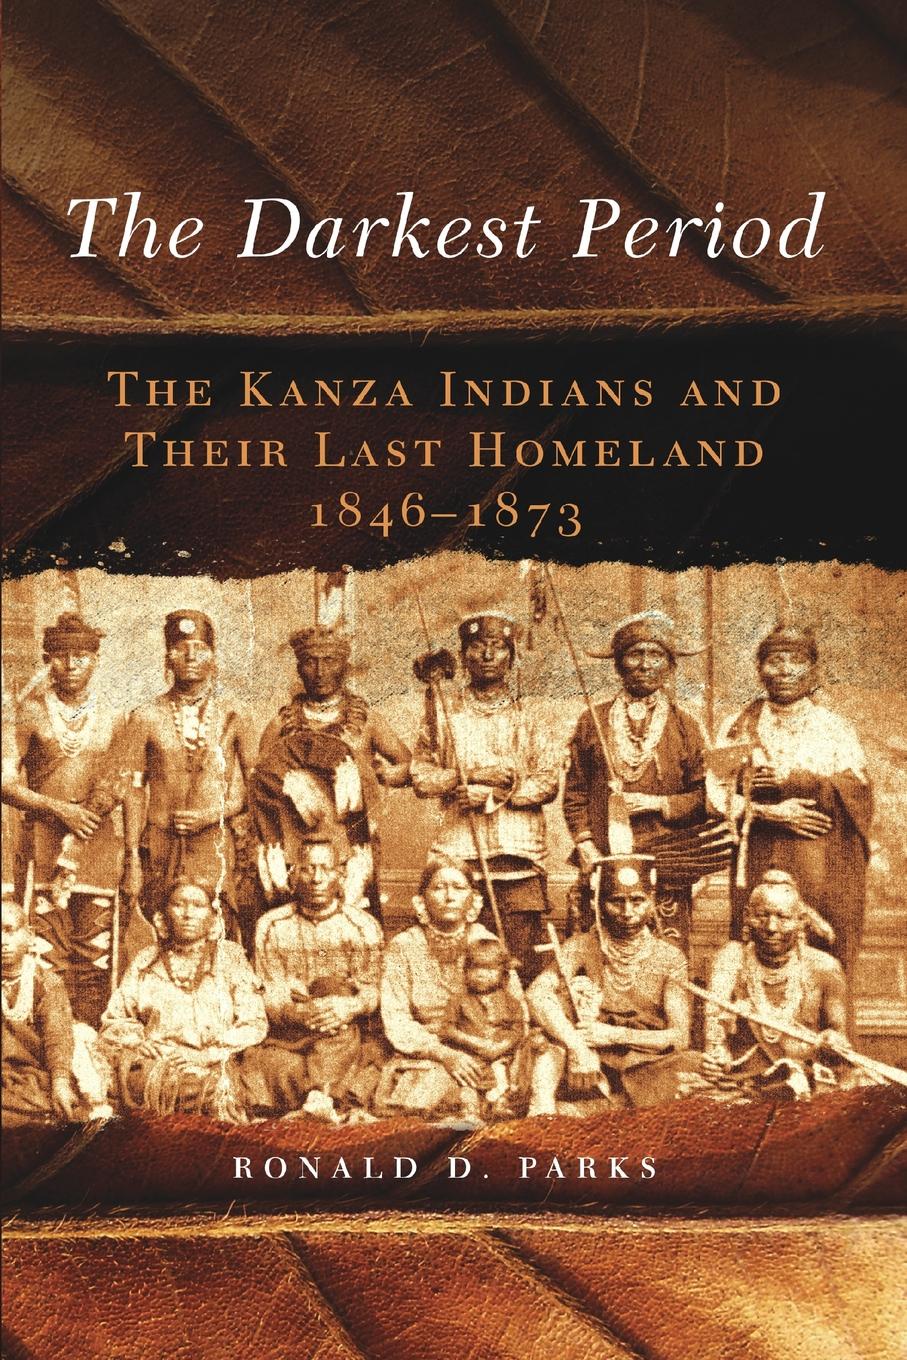 The Darkest Period. The Kanza Indians and Their Last Homeland, 1846-1873